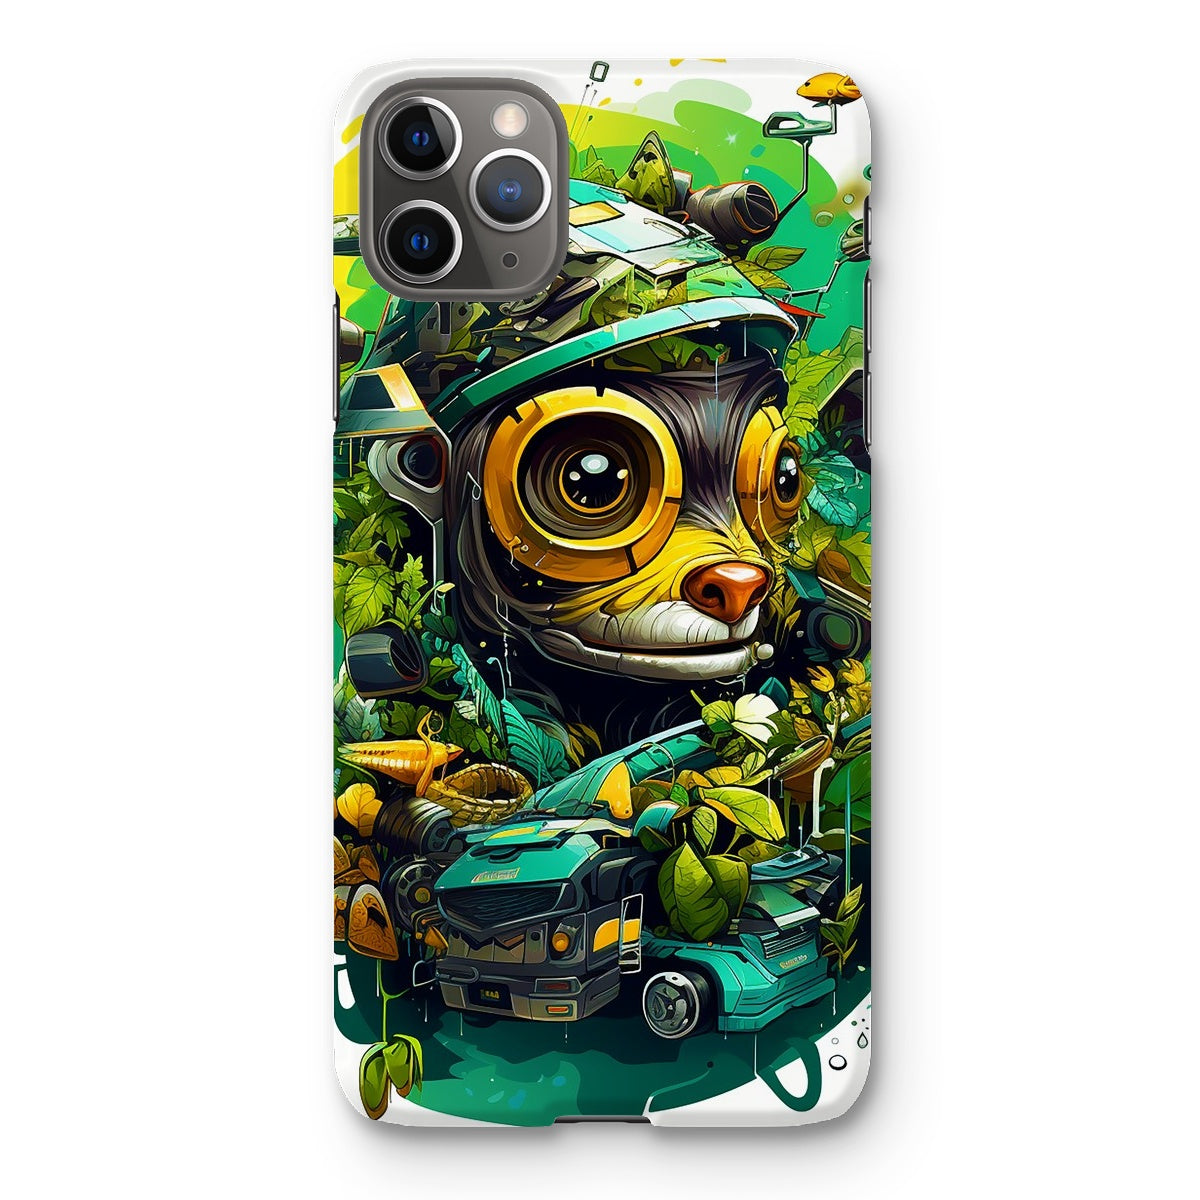 Nature's Resilience: Surreal Auto-Forest Artwork - Whimsical Raccoon and Greenery Infused Car  Snap Phone Case